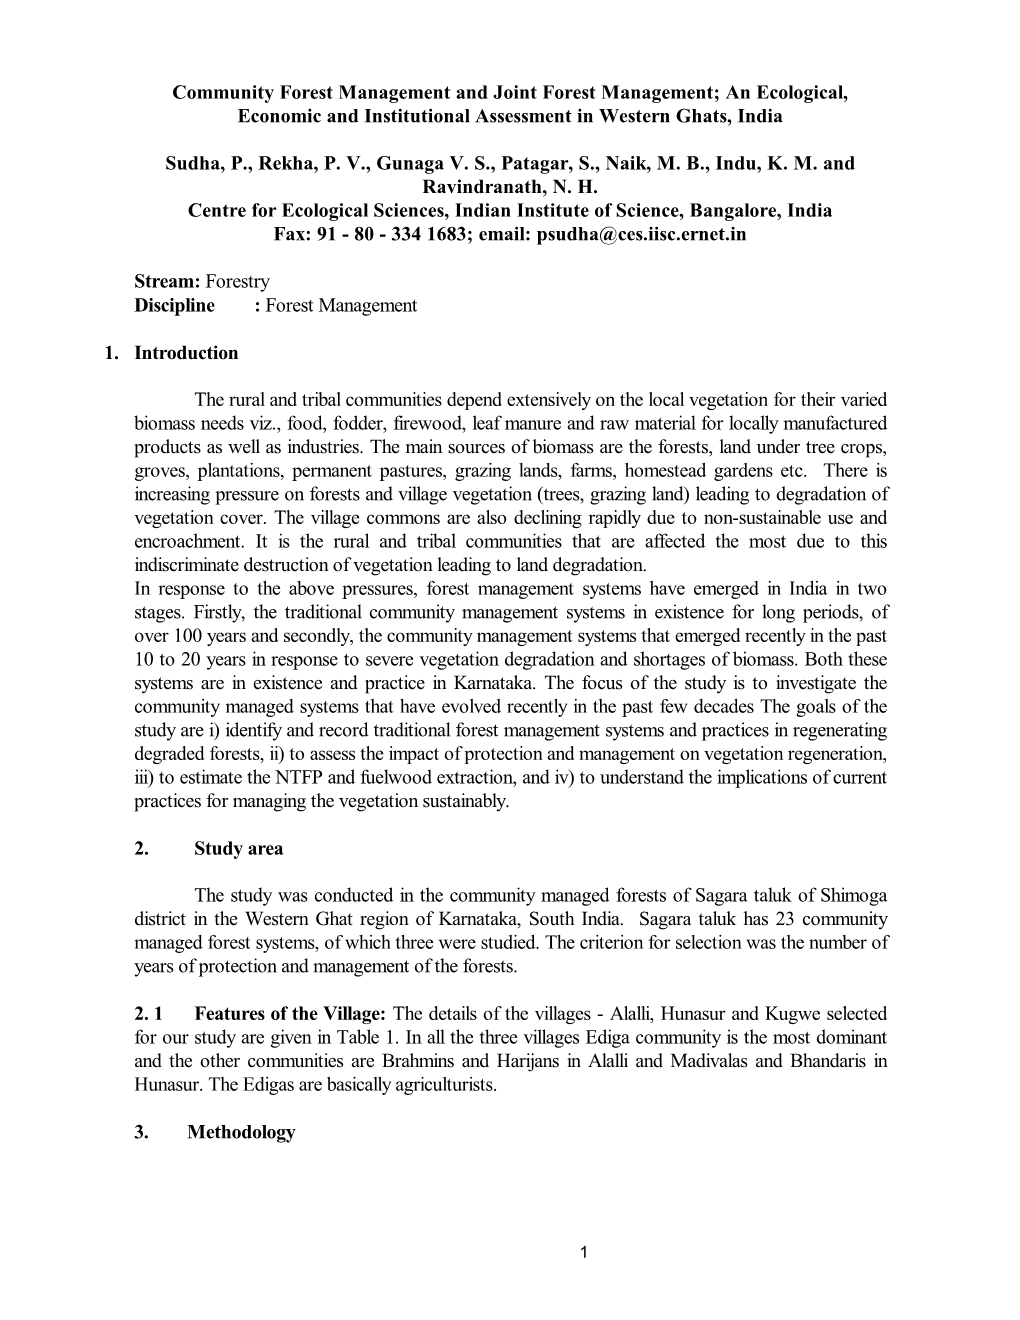 Community Forest Management and Joint Forest Management; an Ecological, Economic and Institutional Assessment in Western Ghats, India